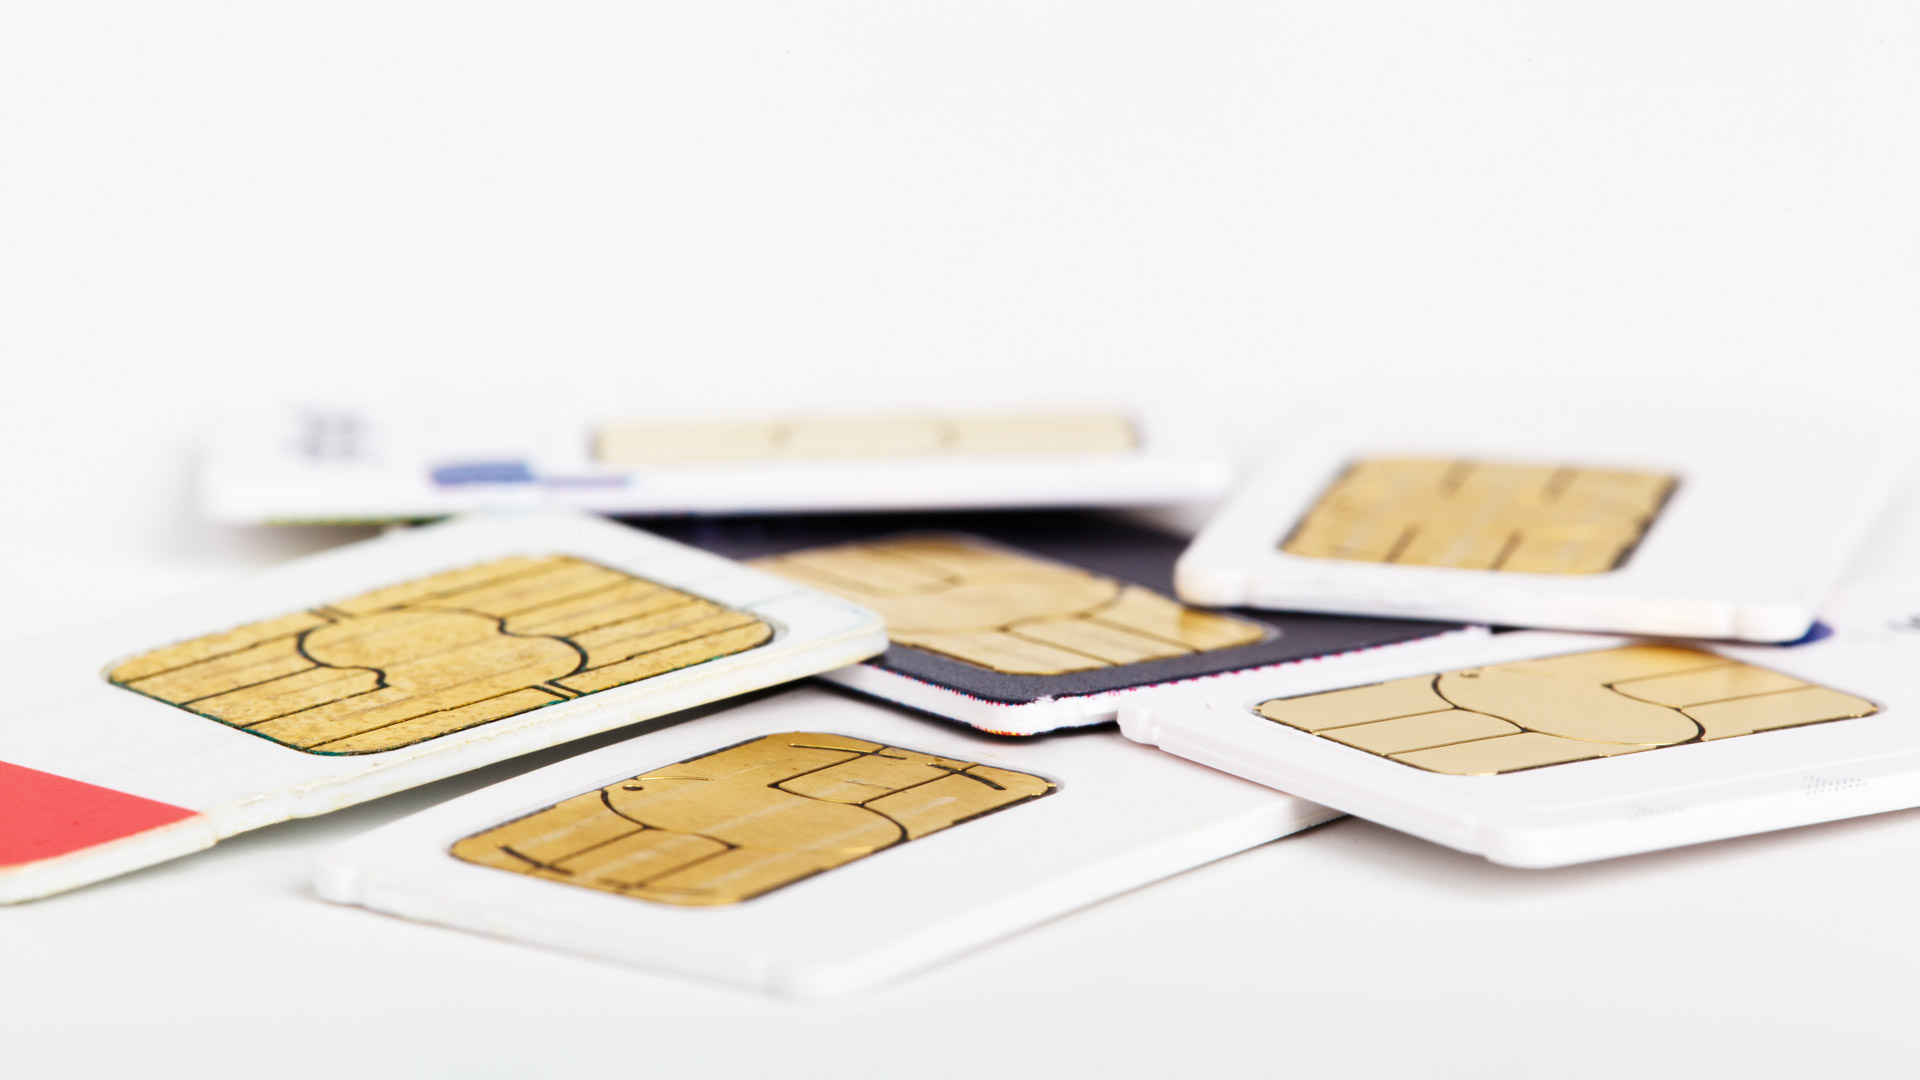 sim-cards-free-stock-photo-public-domain-pictures